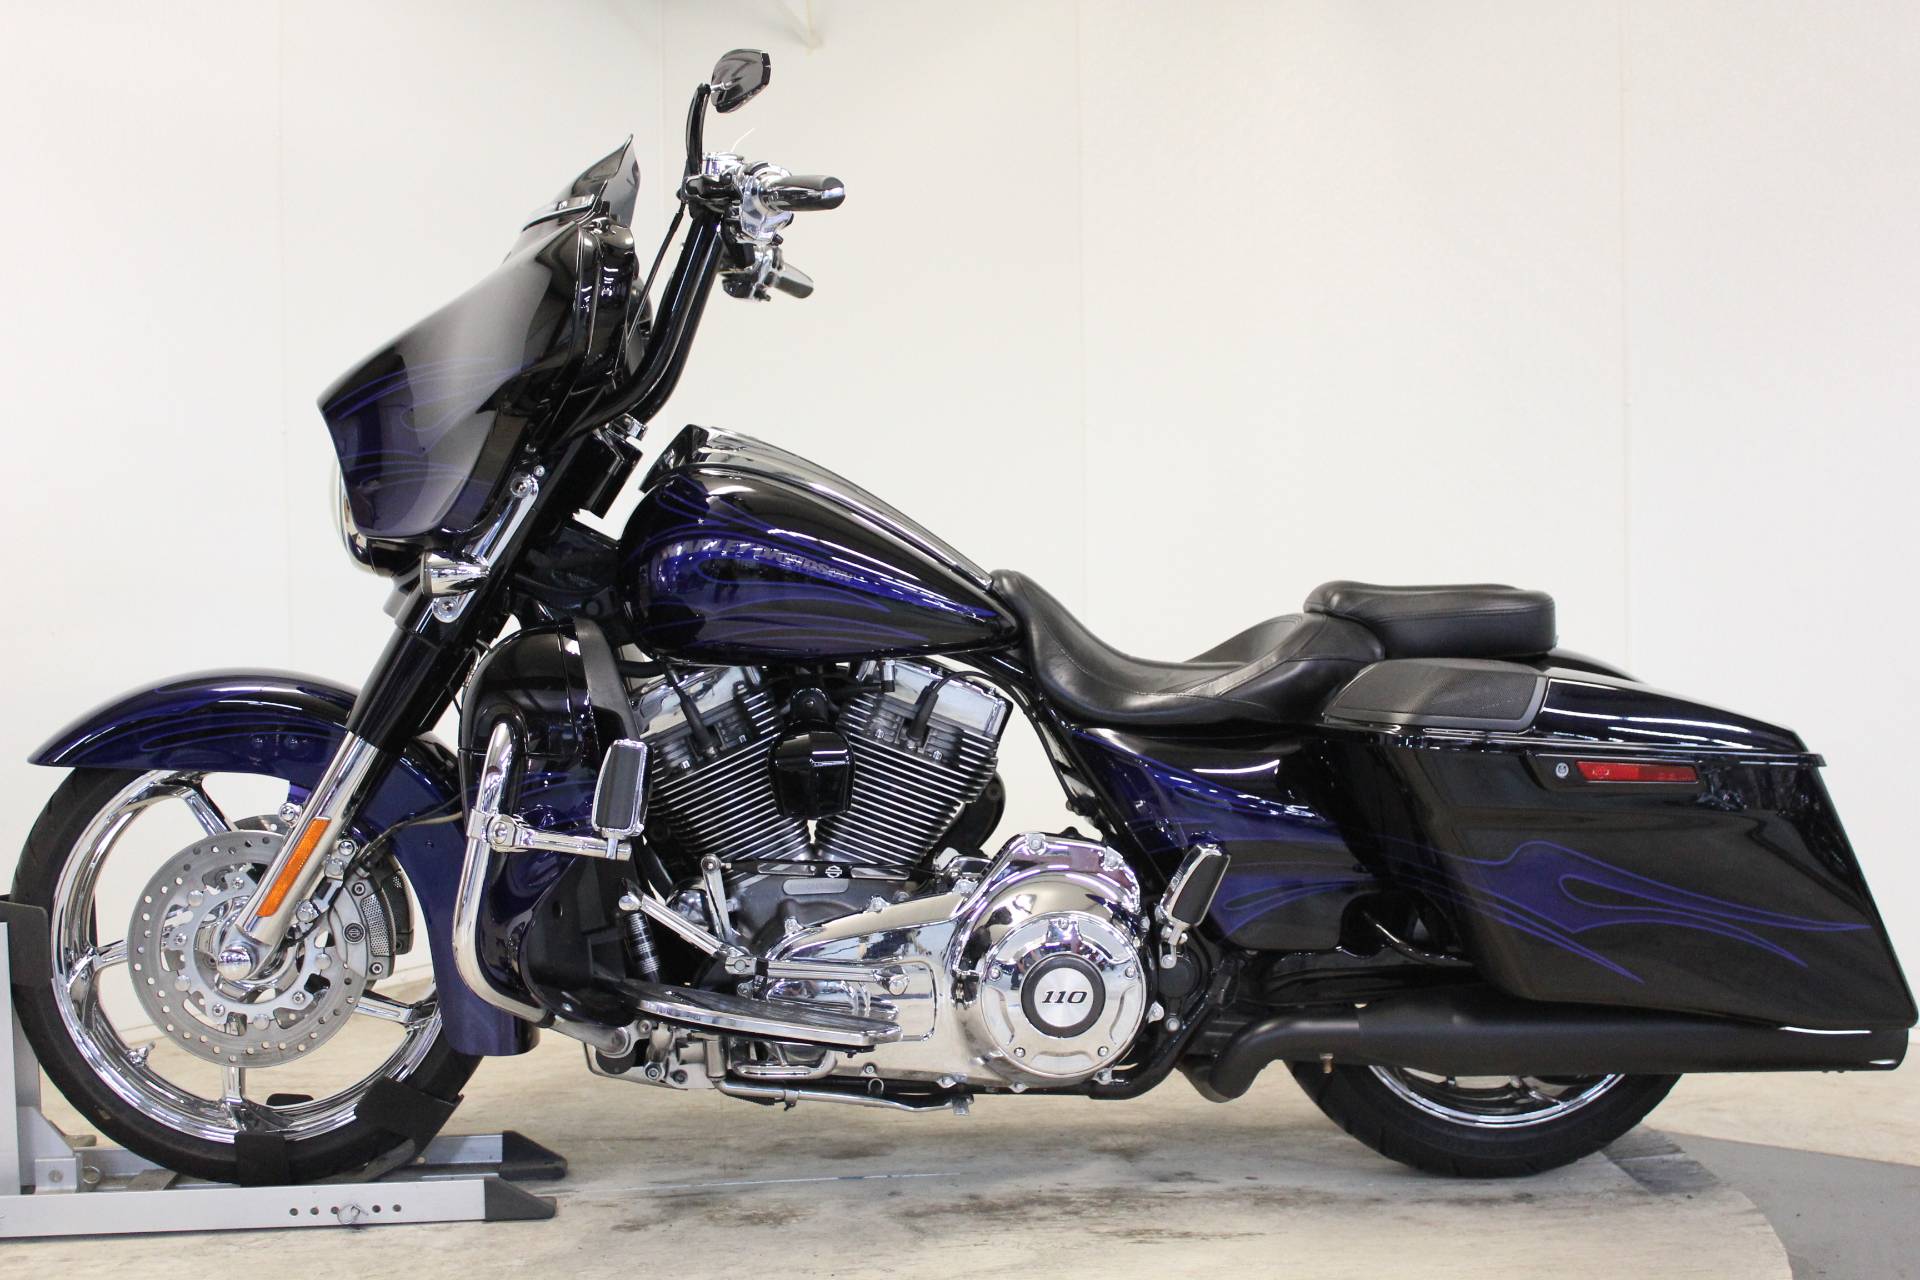 Used 2016 Harley Davidson Cvo Street Glide Black Licorice With Midnight Cobalt Flames Motorcycles In Pittsfield Ma 965326